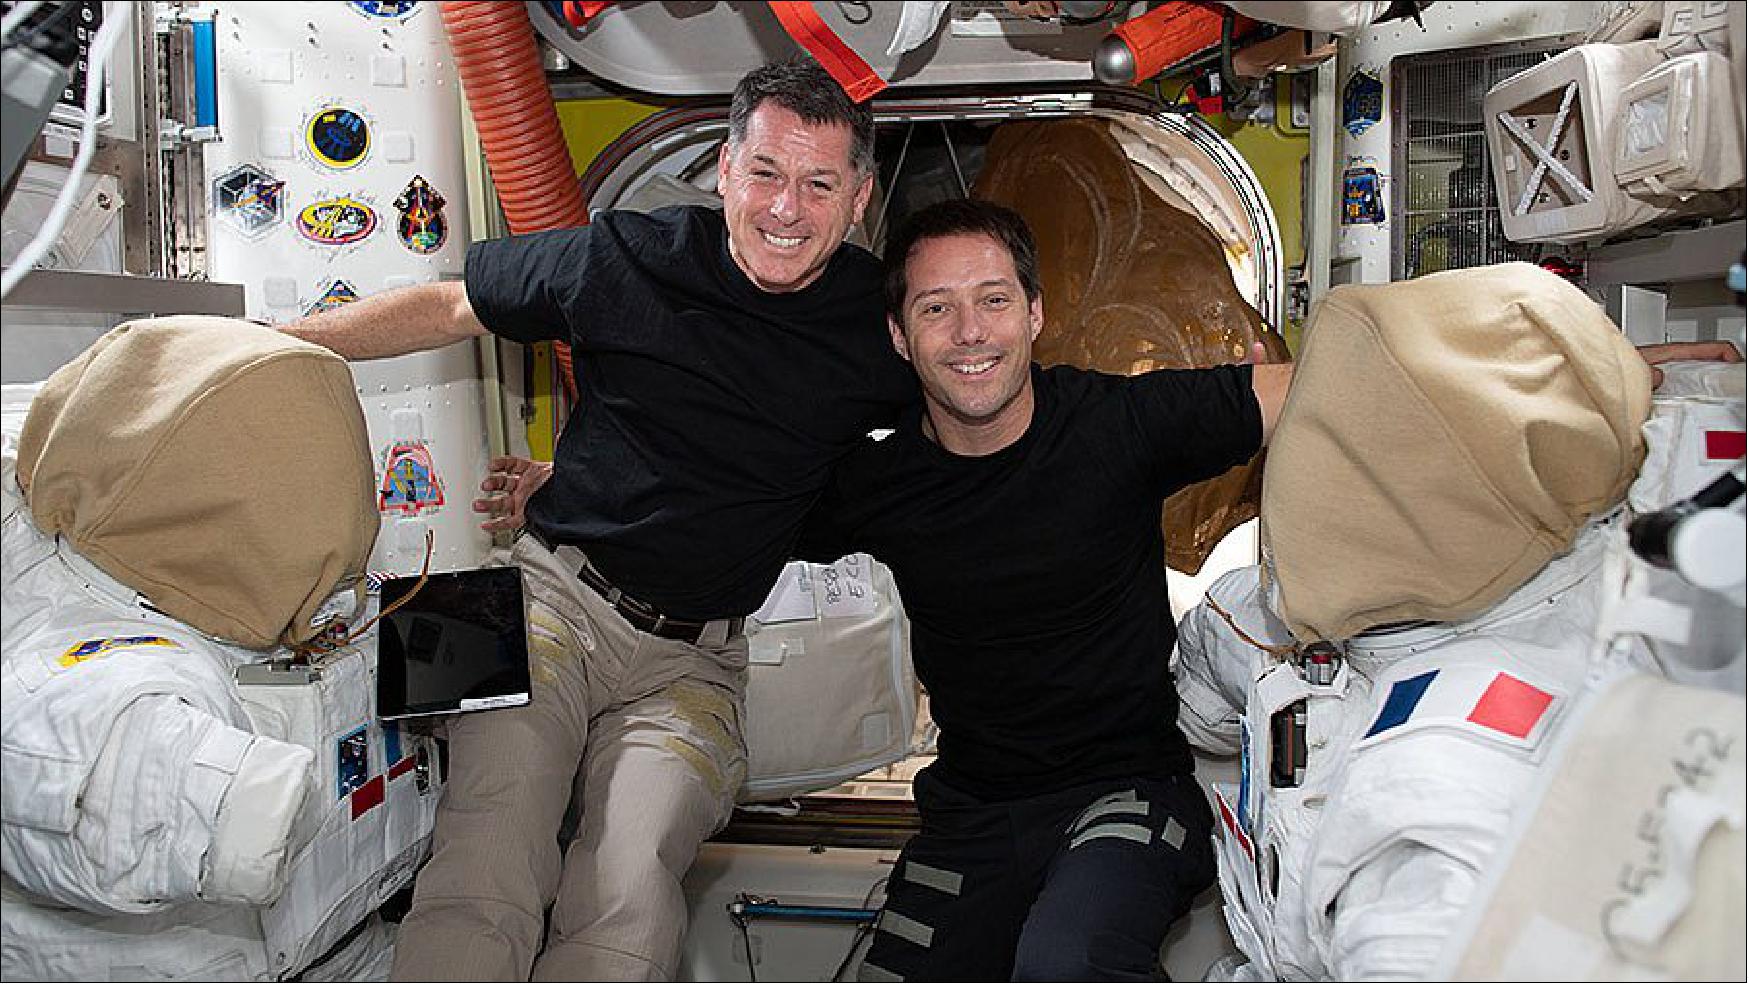 Figure 12: Astronauts Shane Kimbrough (from left) and Thomas Pesquet pose for a portrait while working on U.S. spacesuits (image credit: NASA)